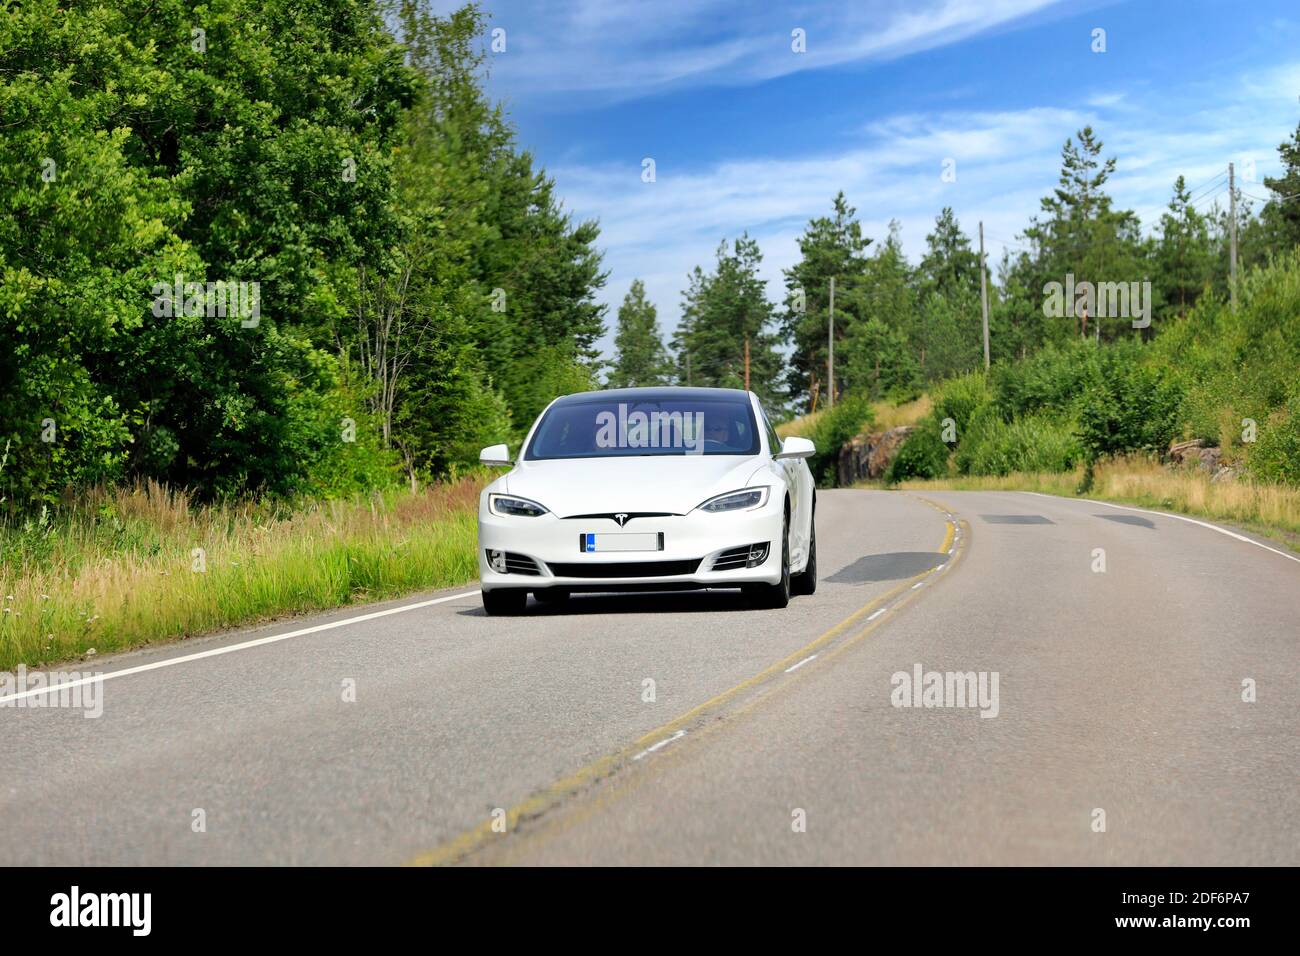 White Tesla Model S electric car driving at speed on rural highway through Finnish countryside in the summer. Salo, Finland. July 19, 2020. Stock Photo